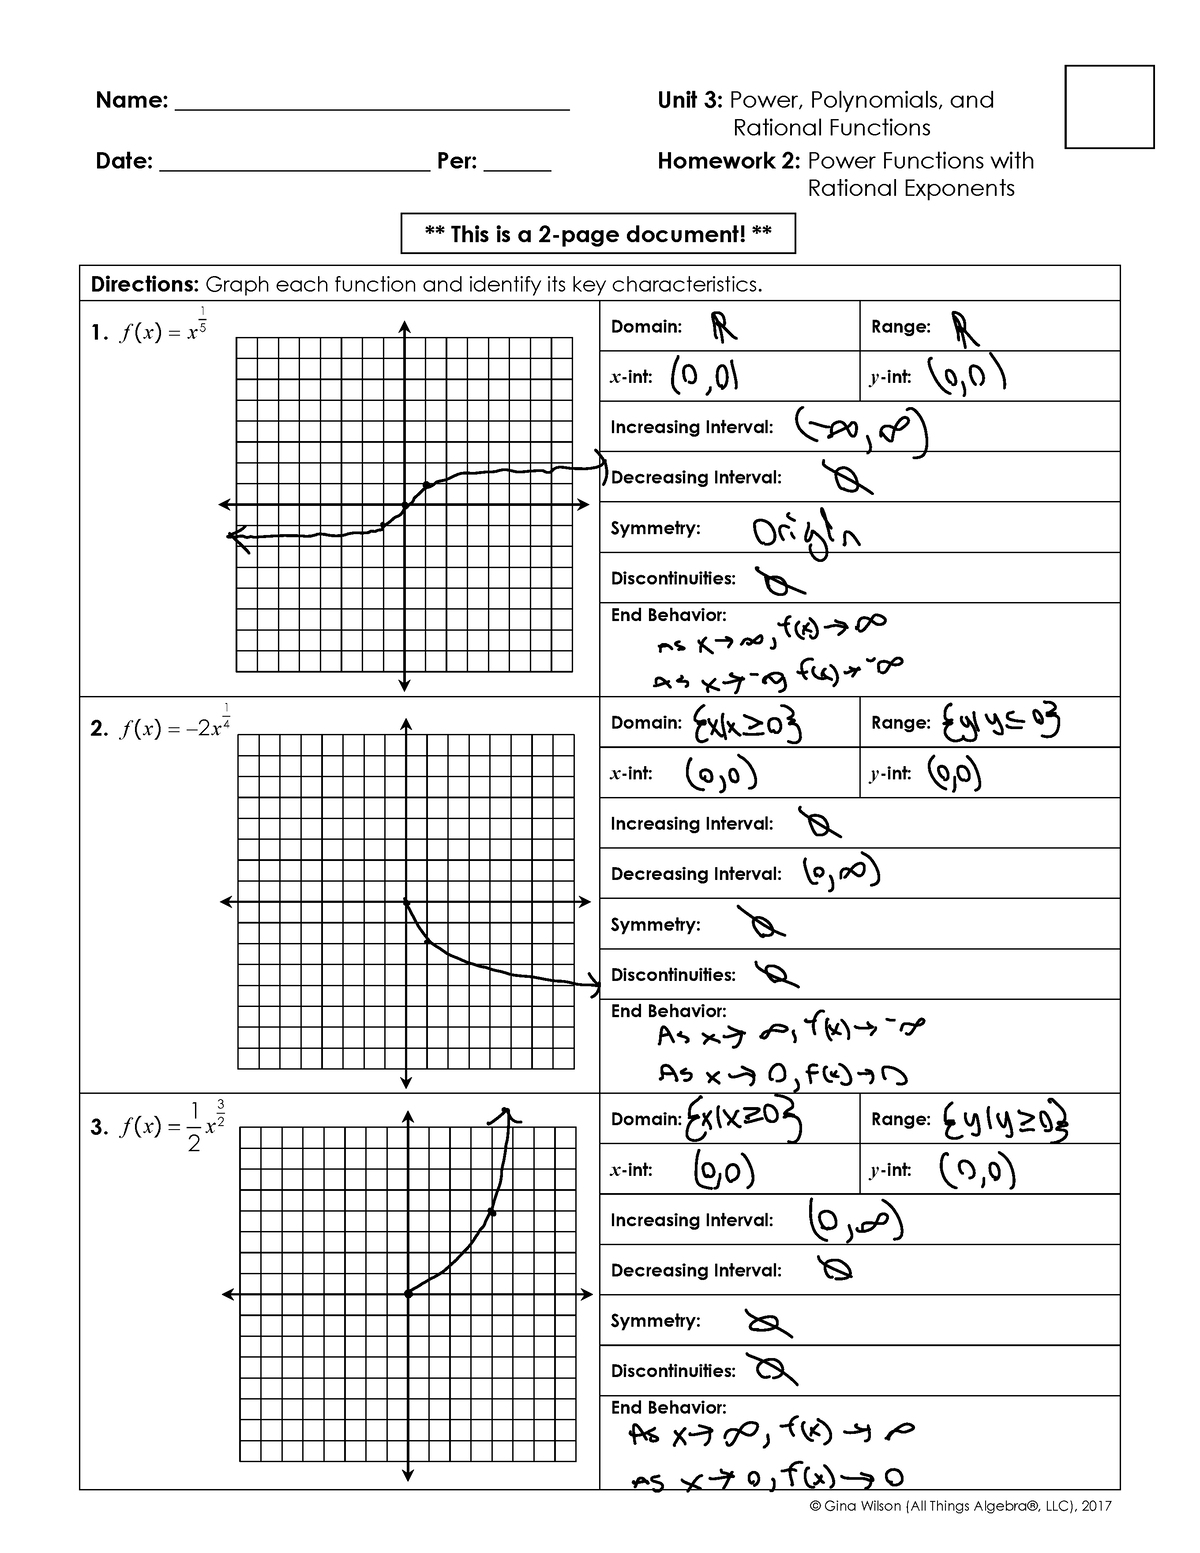 unit 5 polynomial functions homework 2 graphing polynomial functions.pdf